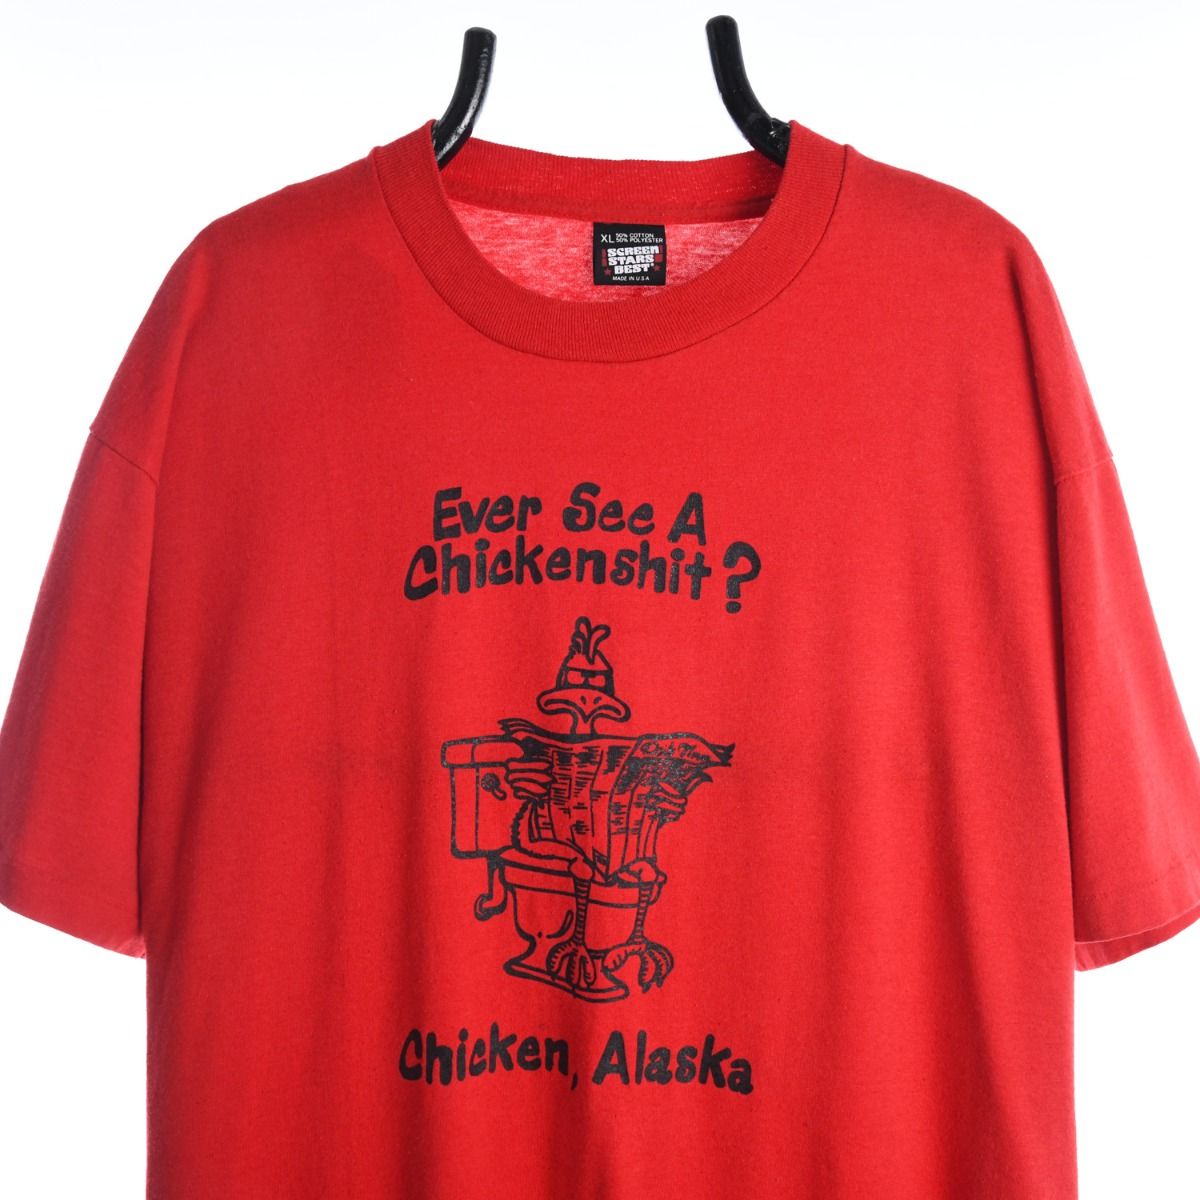 'Ever See A Chickenshit?' 1990s T-Shirt